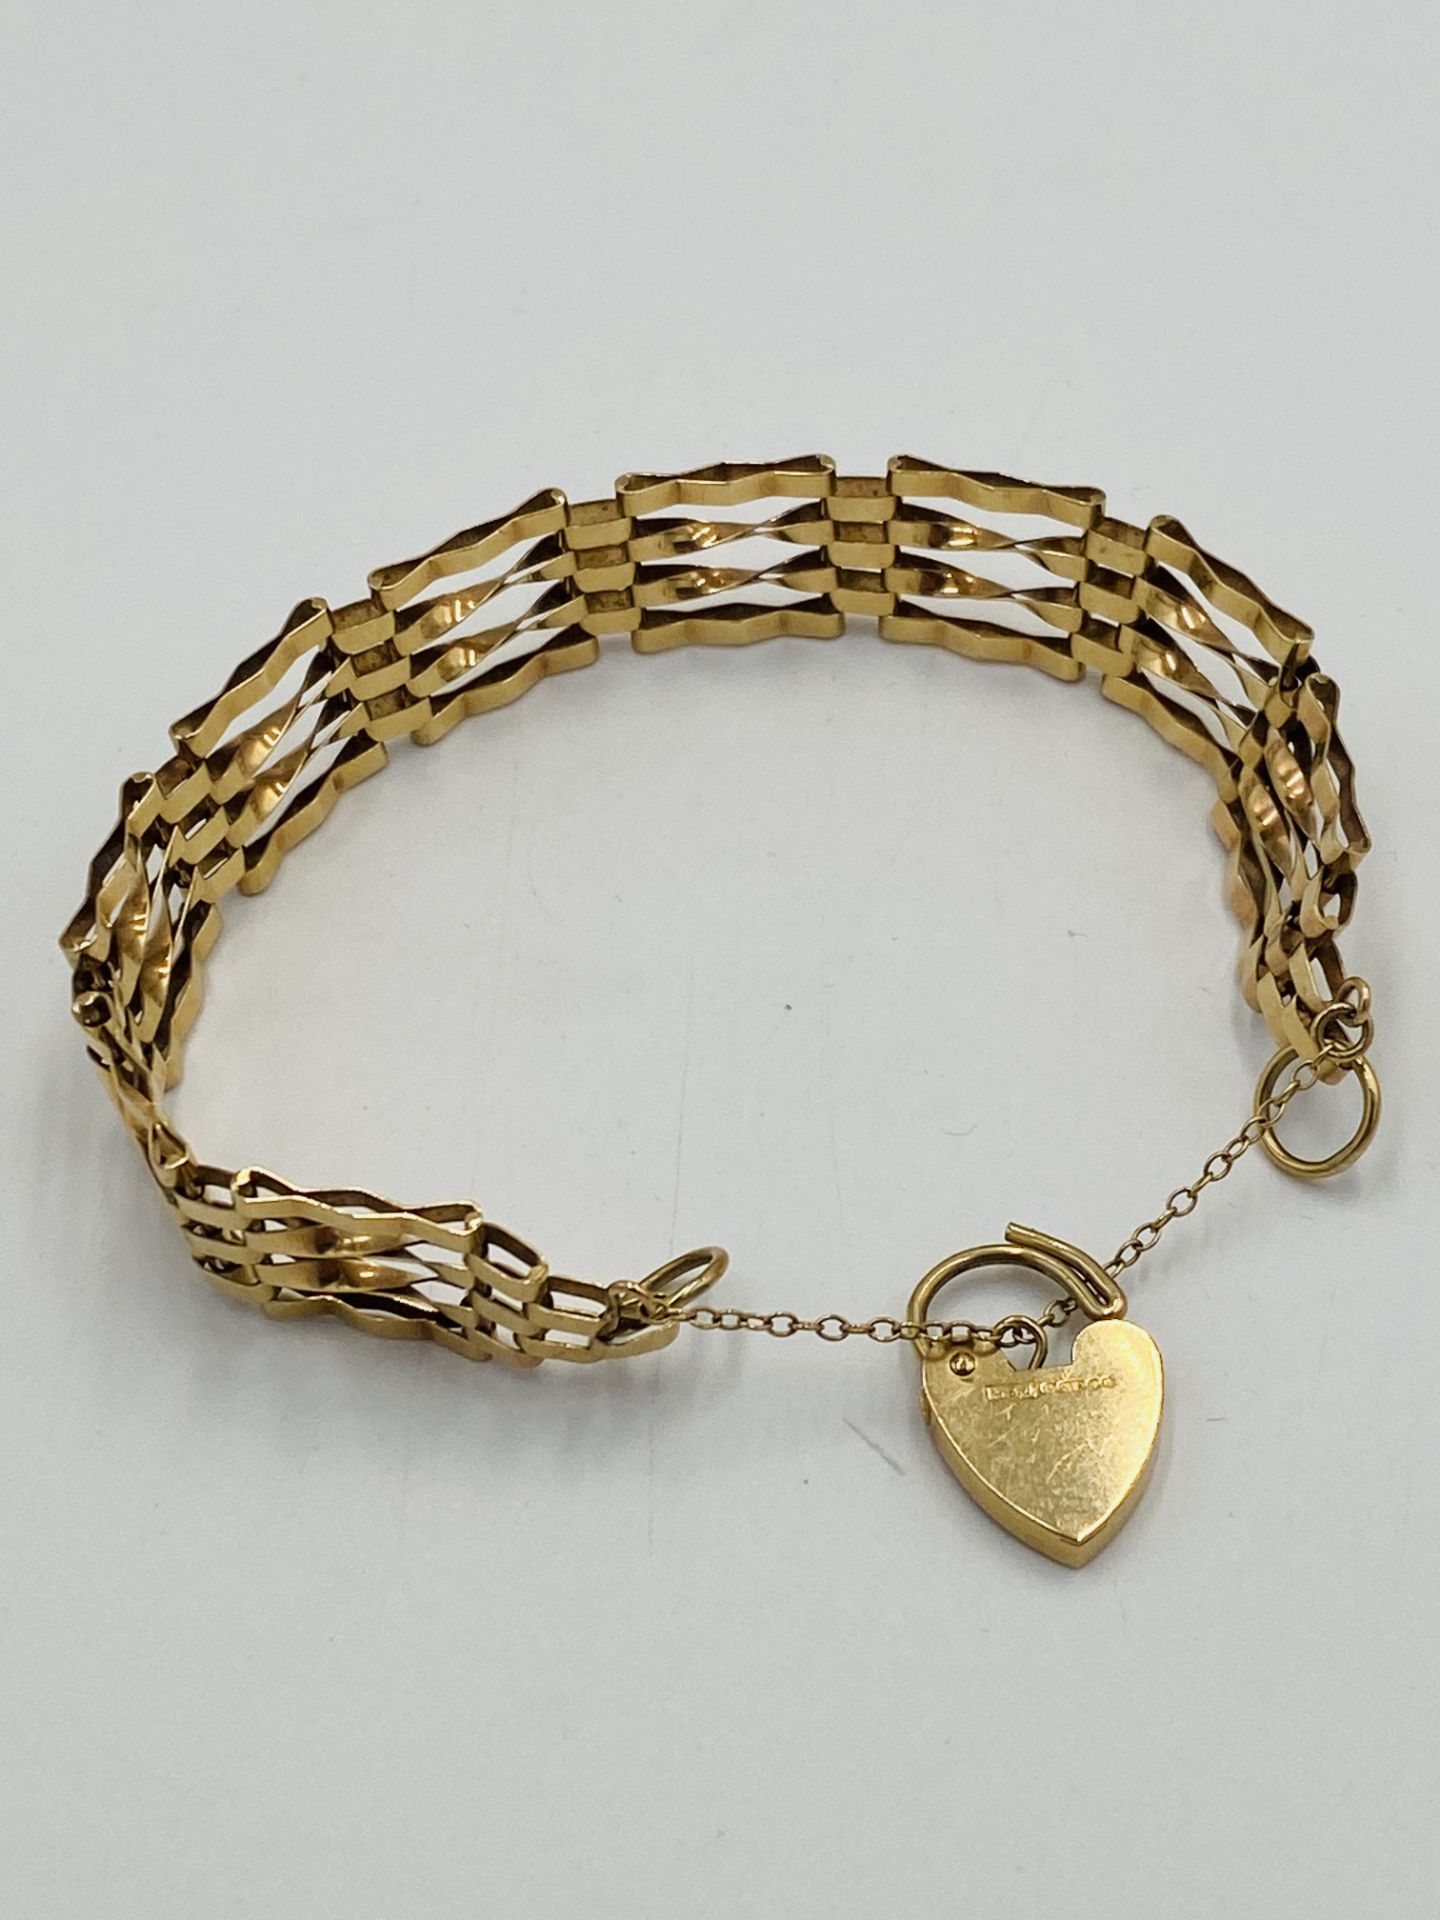 9ct gold bracelet with 9ct gold padlock - Image 3 of 6